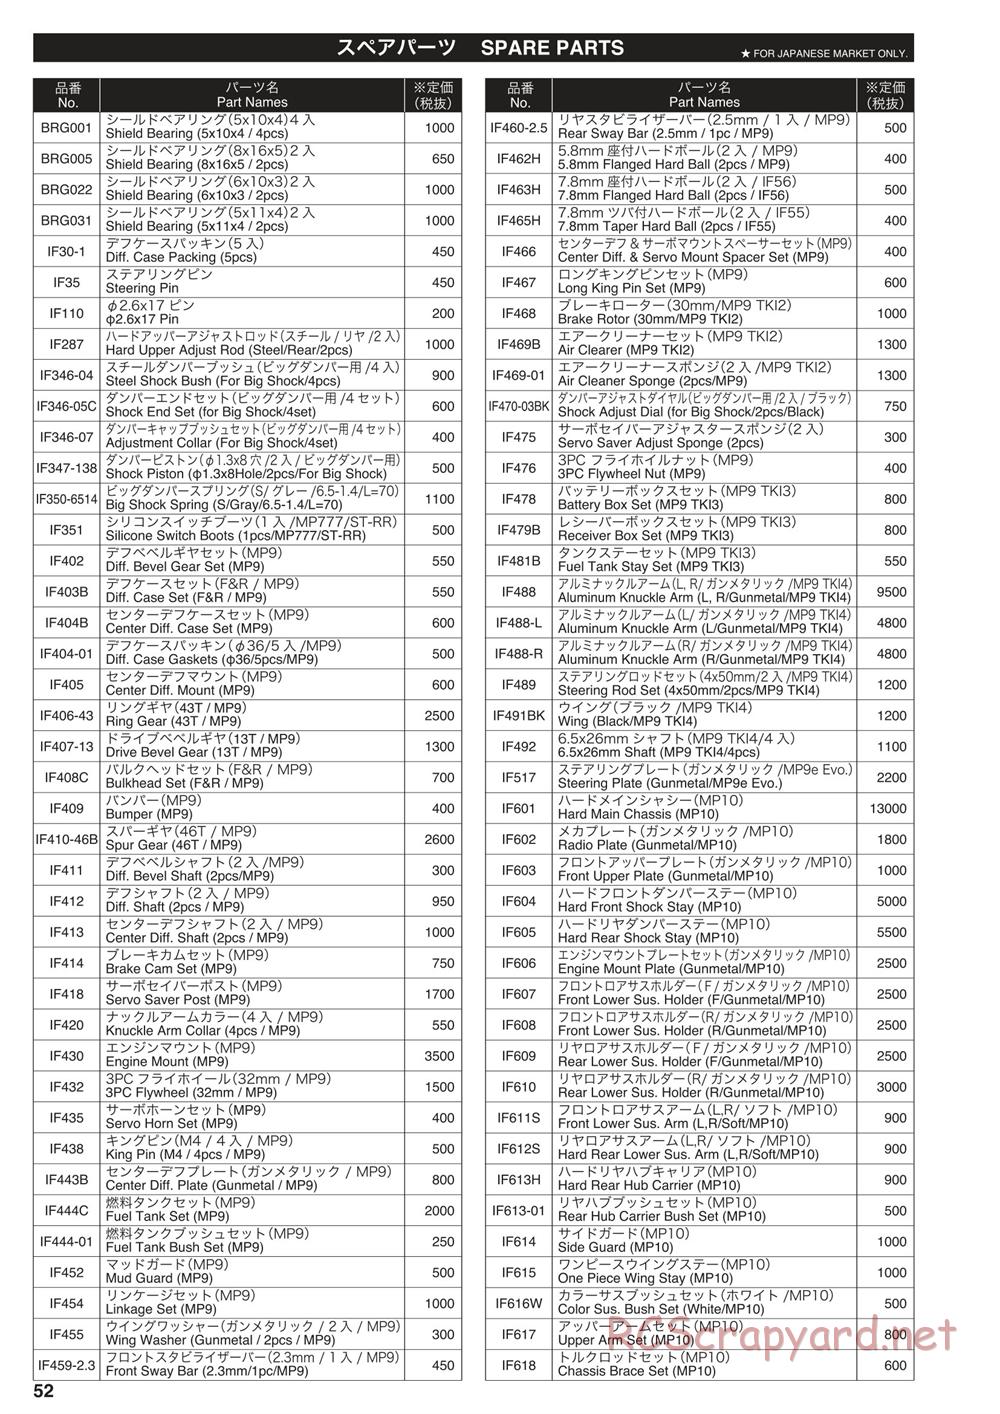 Kyosho - Inferno MP10 - Parts List - Page 1